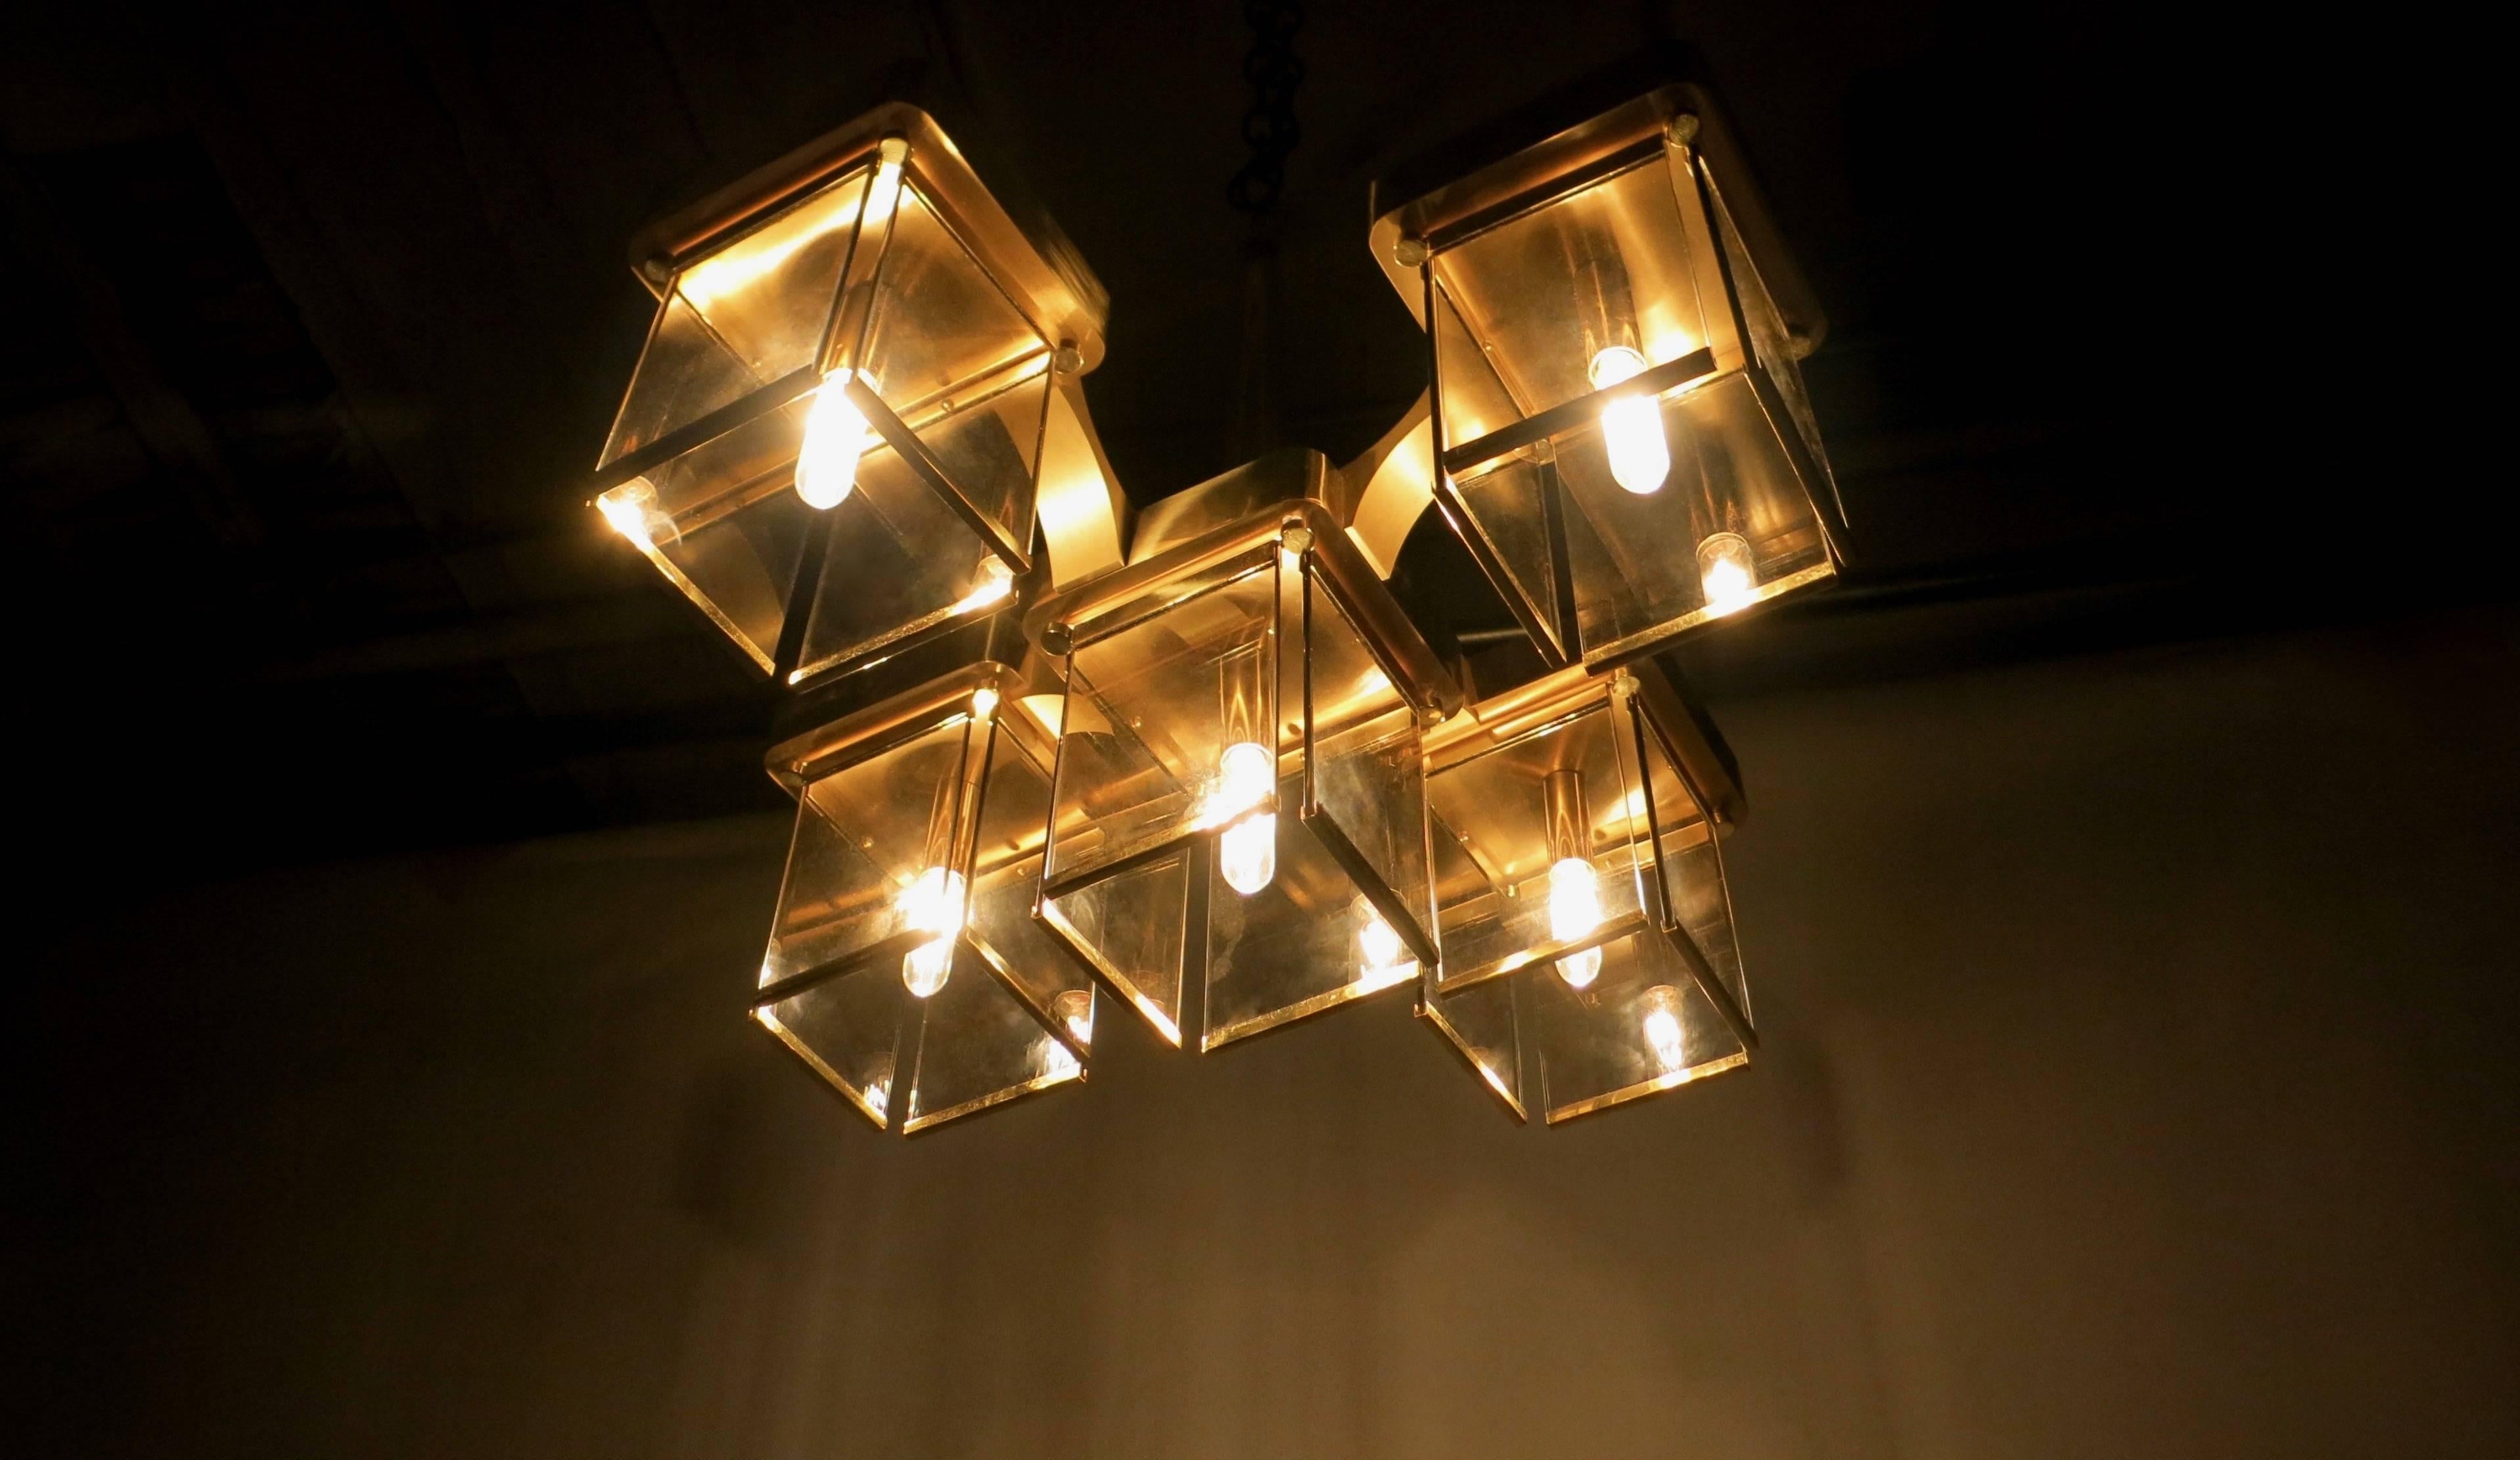 Mid-20th Century Brass and Smoked Glass Ceiling Fixture with 5 Lights by Sciolari, Italy 1960s